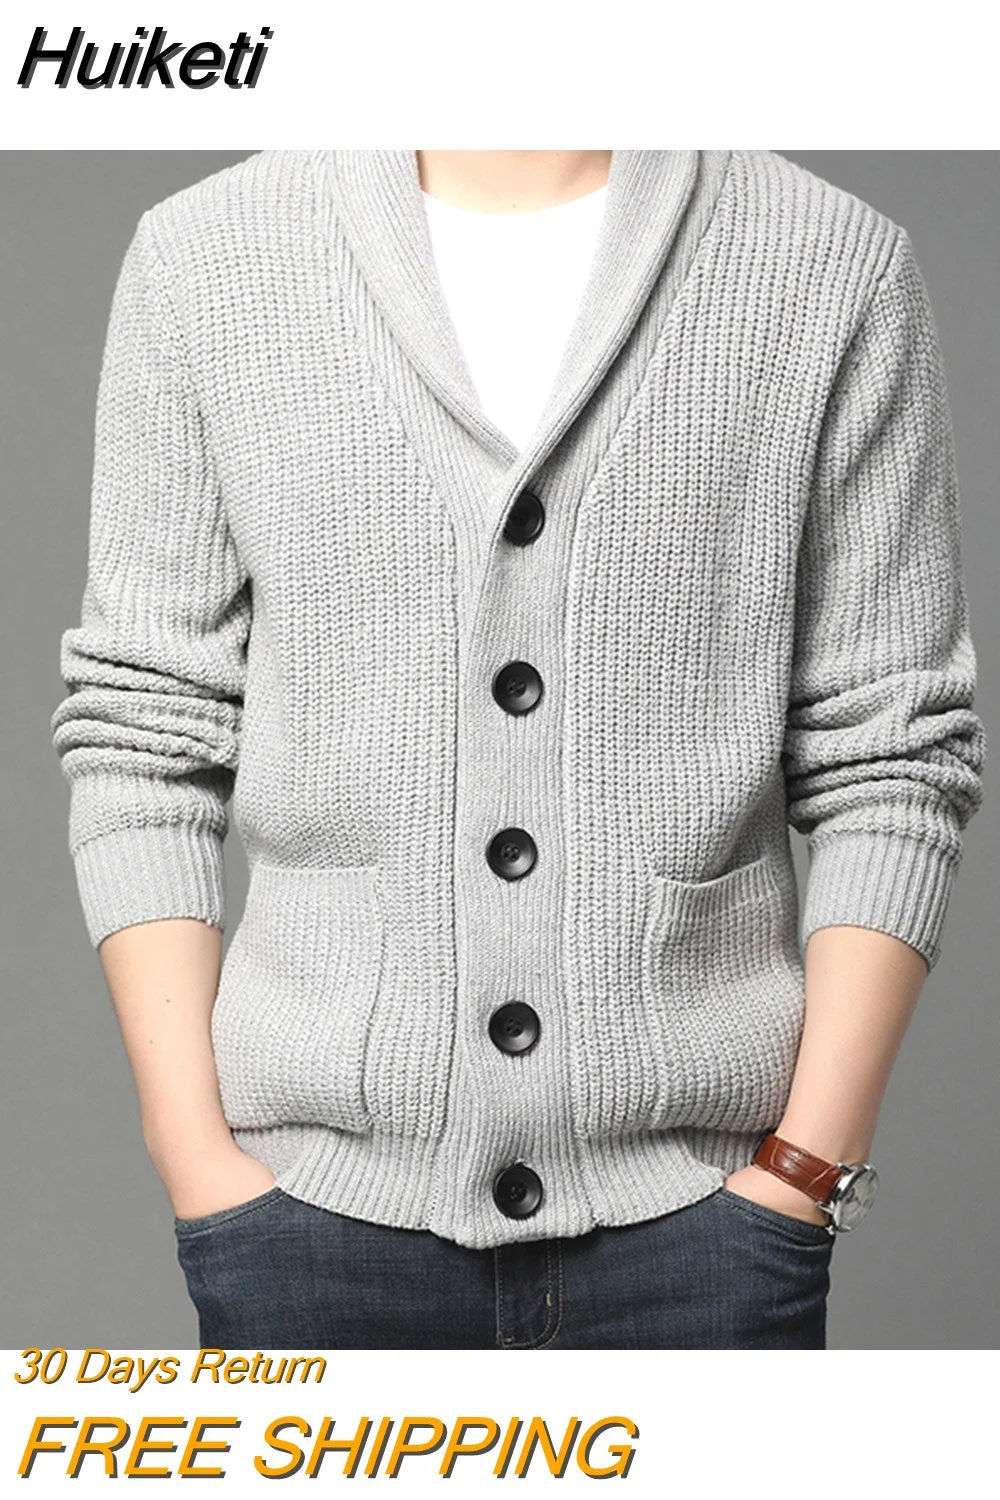 Huiketi Quality Autumn Winter Cardigan Men Thick Knitted Solid Sweater Jakcet Fashion Turn Down Collar Single Breasted Cardigan Men